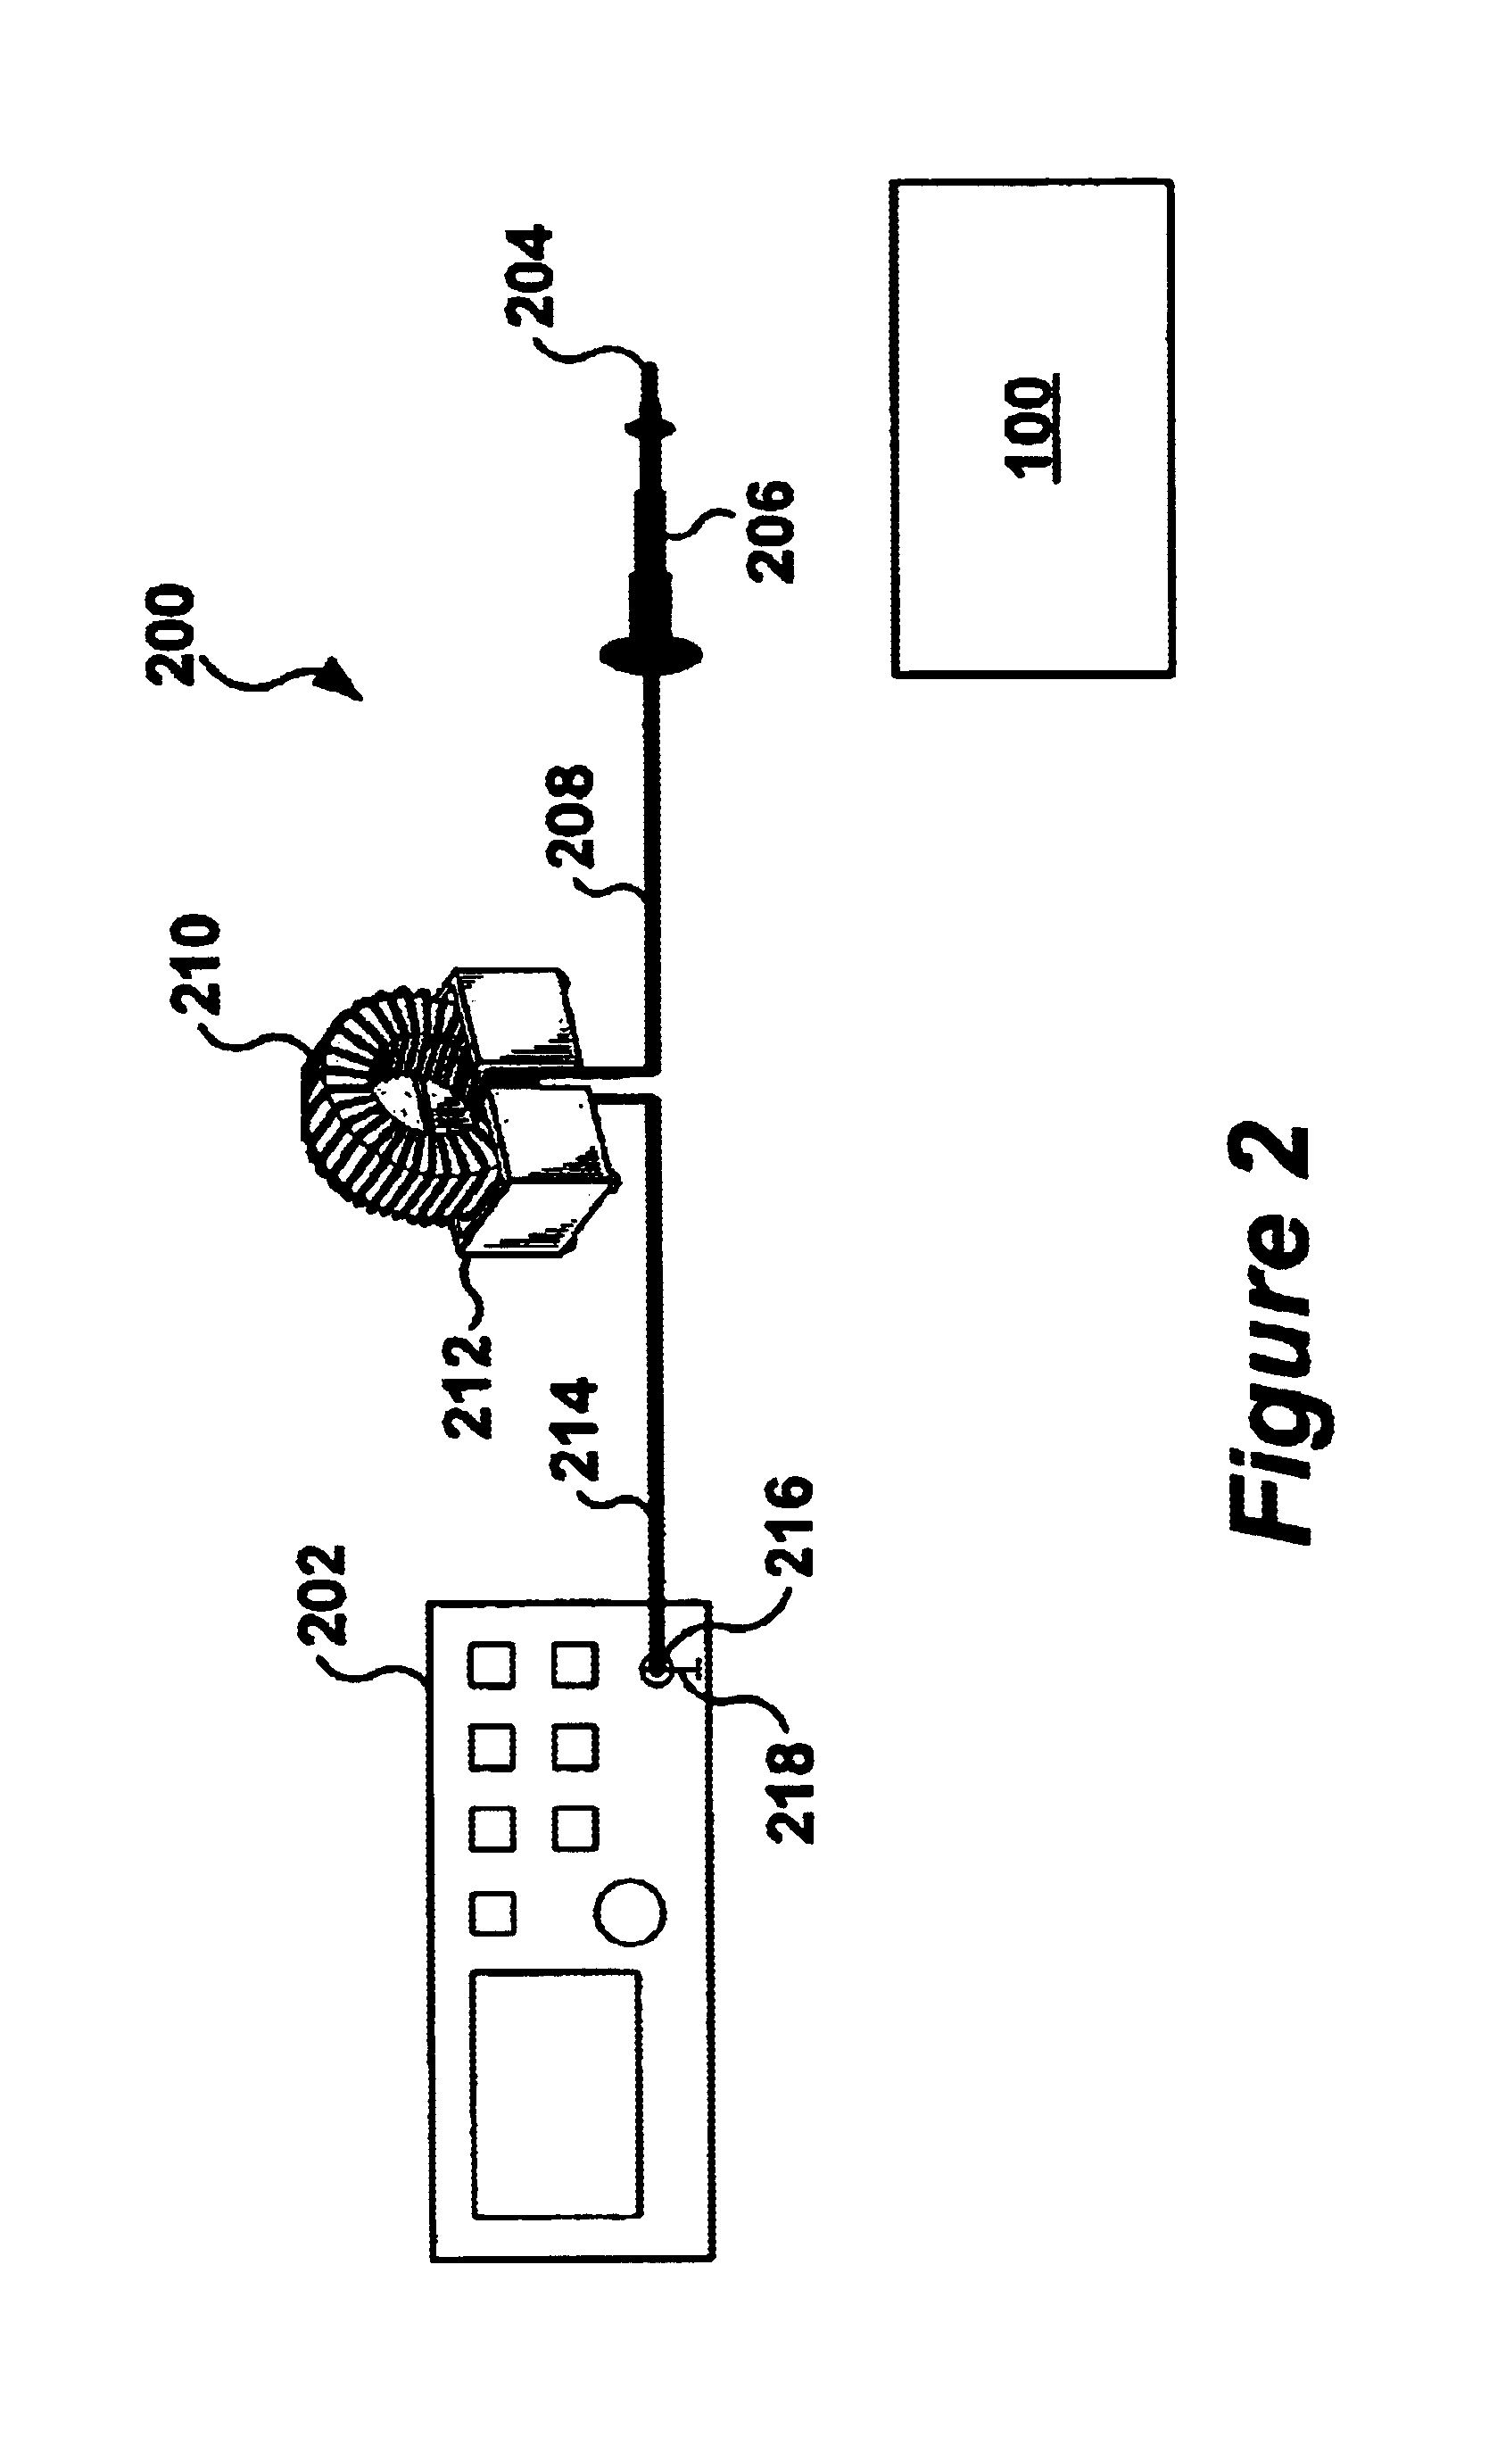 Inductively coupled direct contact test probe